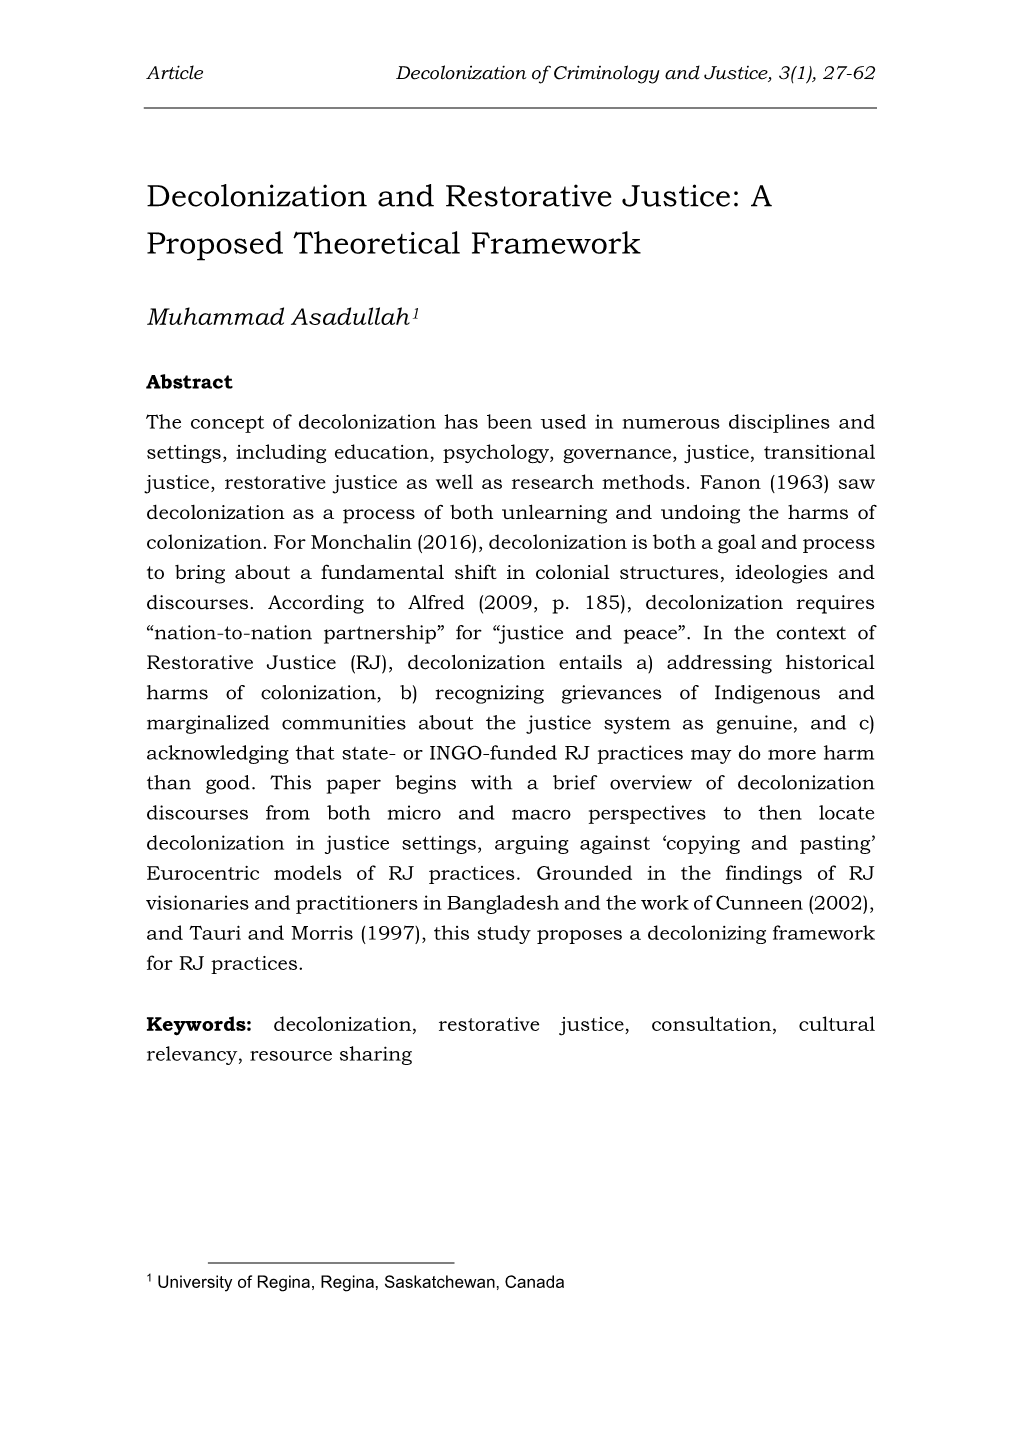 Decolonization and Restorative Justice: a Proposed Theoretical Framework